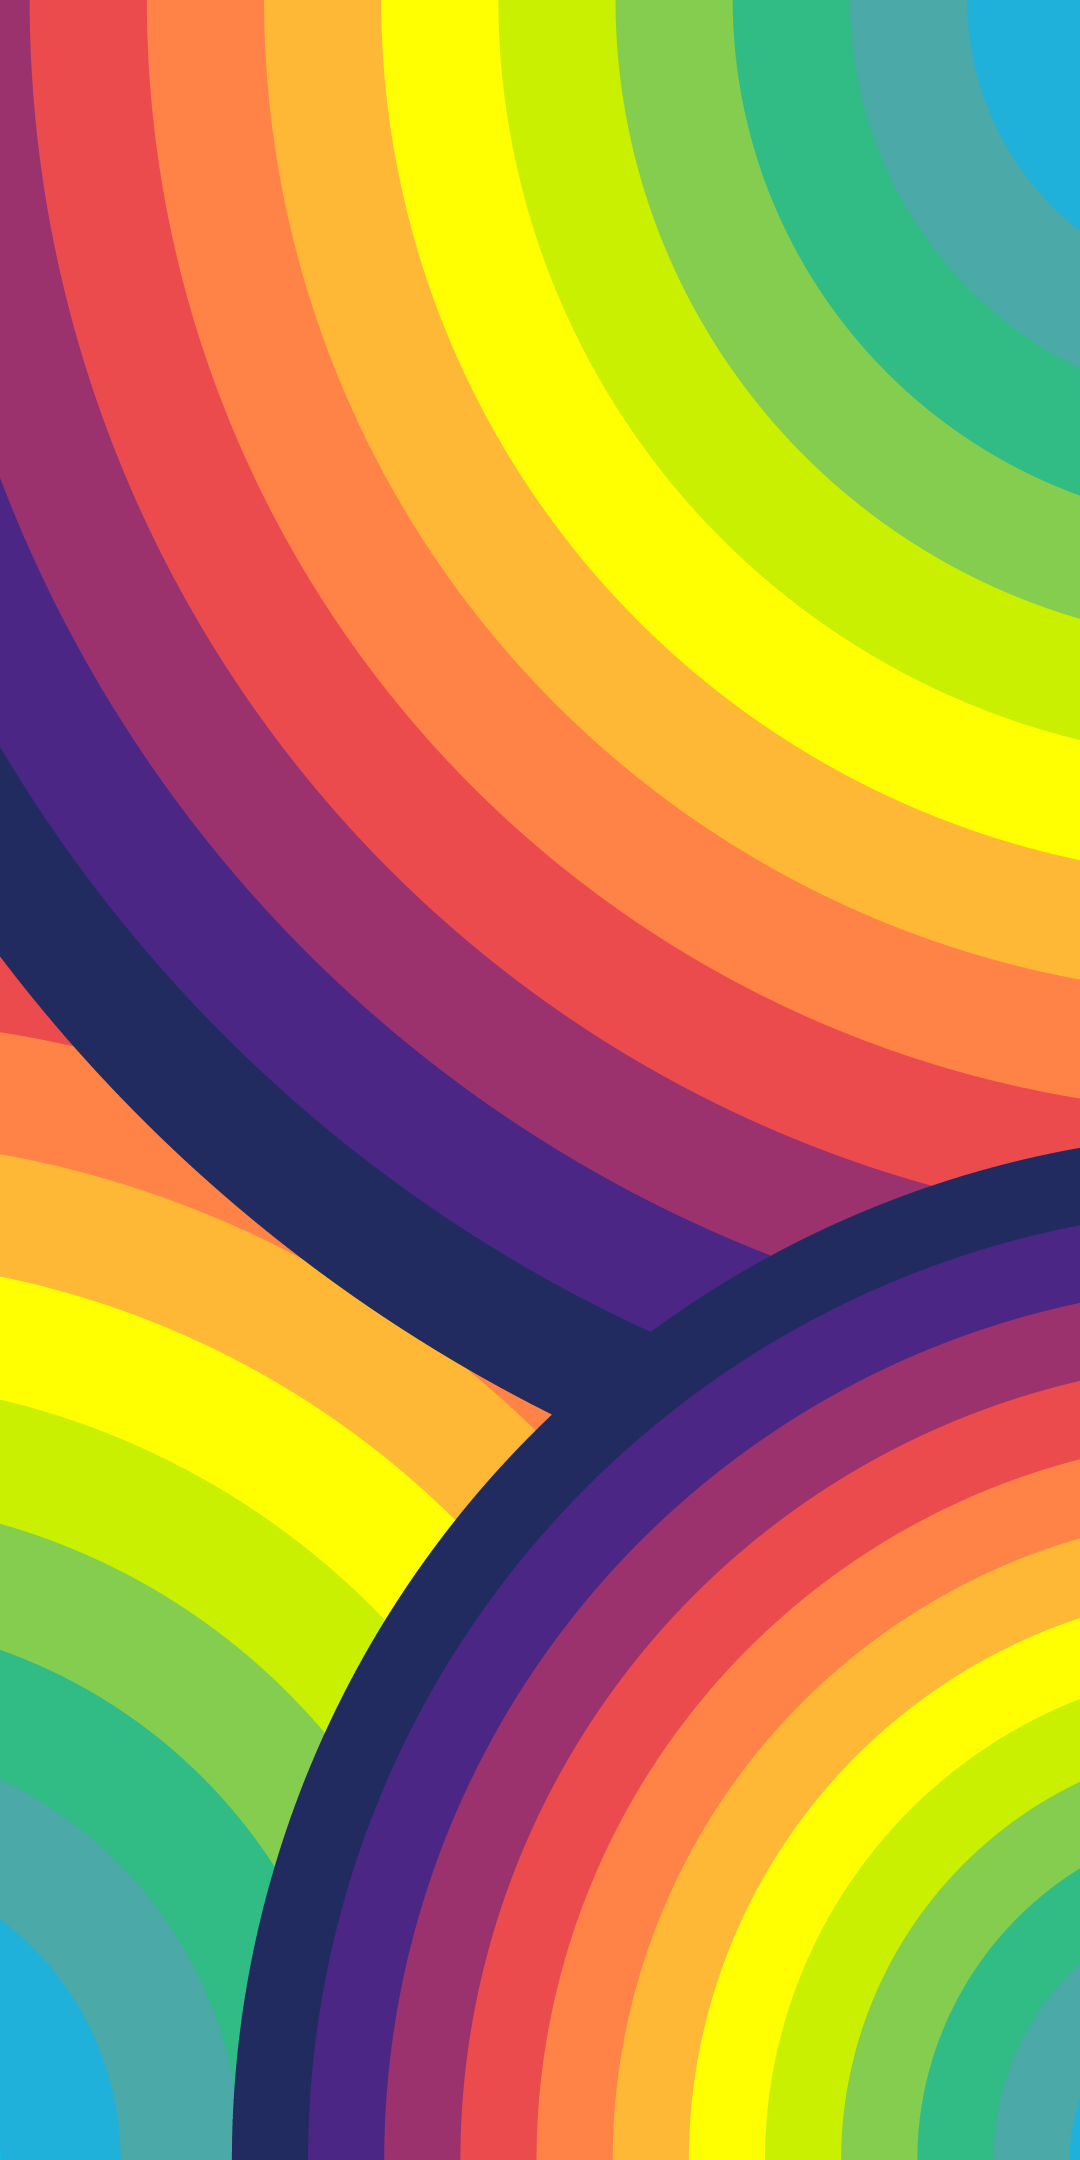 Colorful Rainbow Wallpapers 4k Hd Colorful Rainbow Backgrounds On